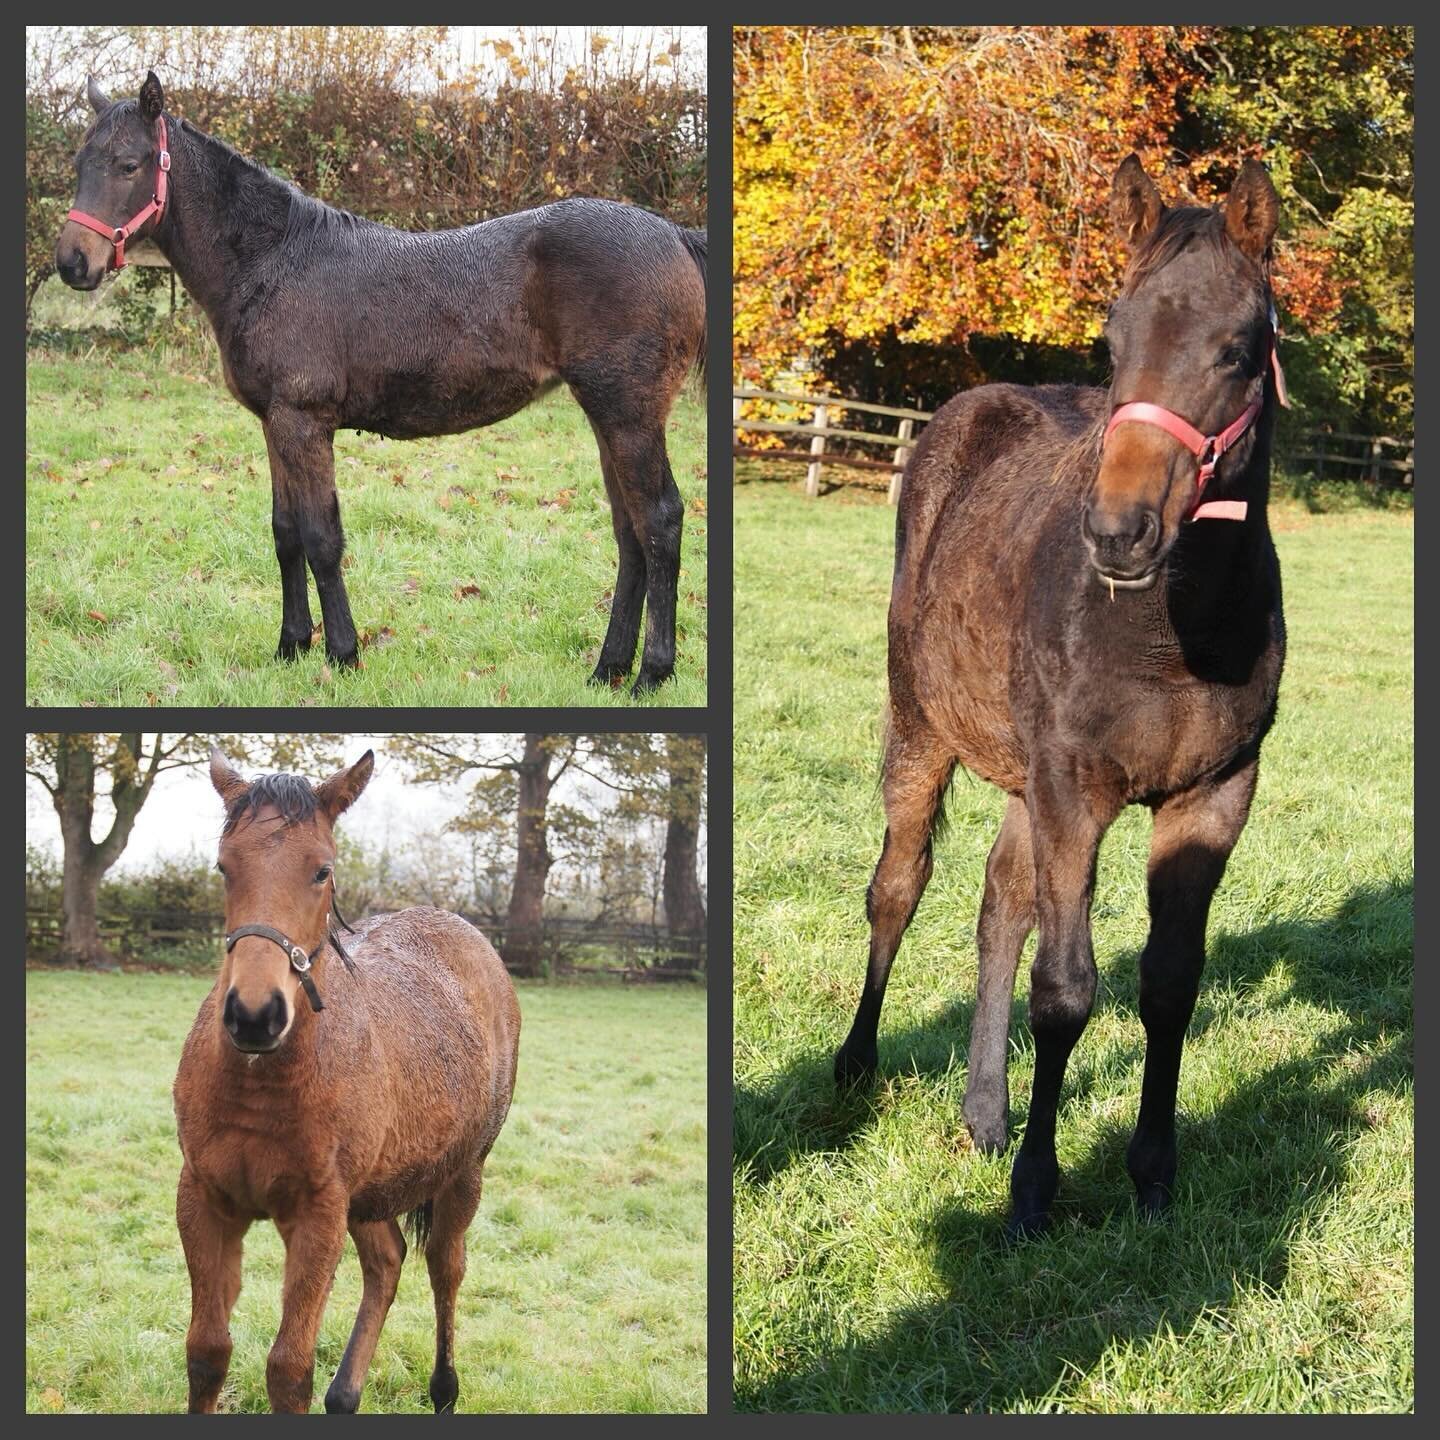 We love to visit our Ubettabelievit foals who are being so well cared for at @nortongrovefarm 😍 It will be very exciting to see how they progress 🙌🏻
#teamtinkler #ubettabelievit #foals